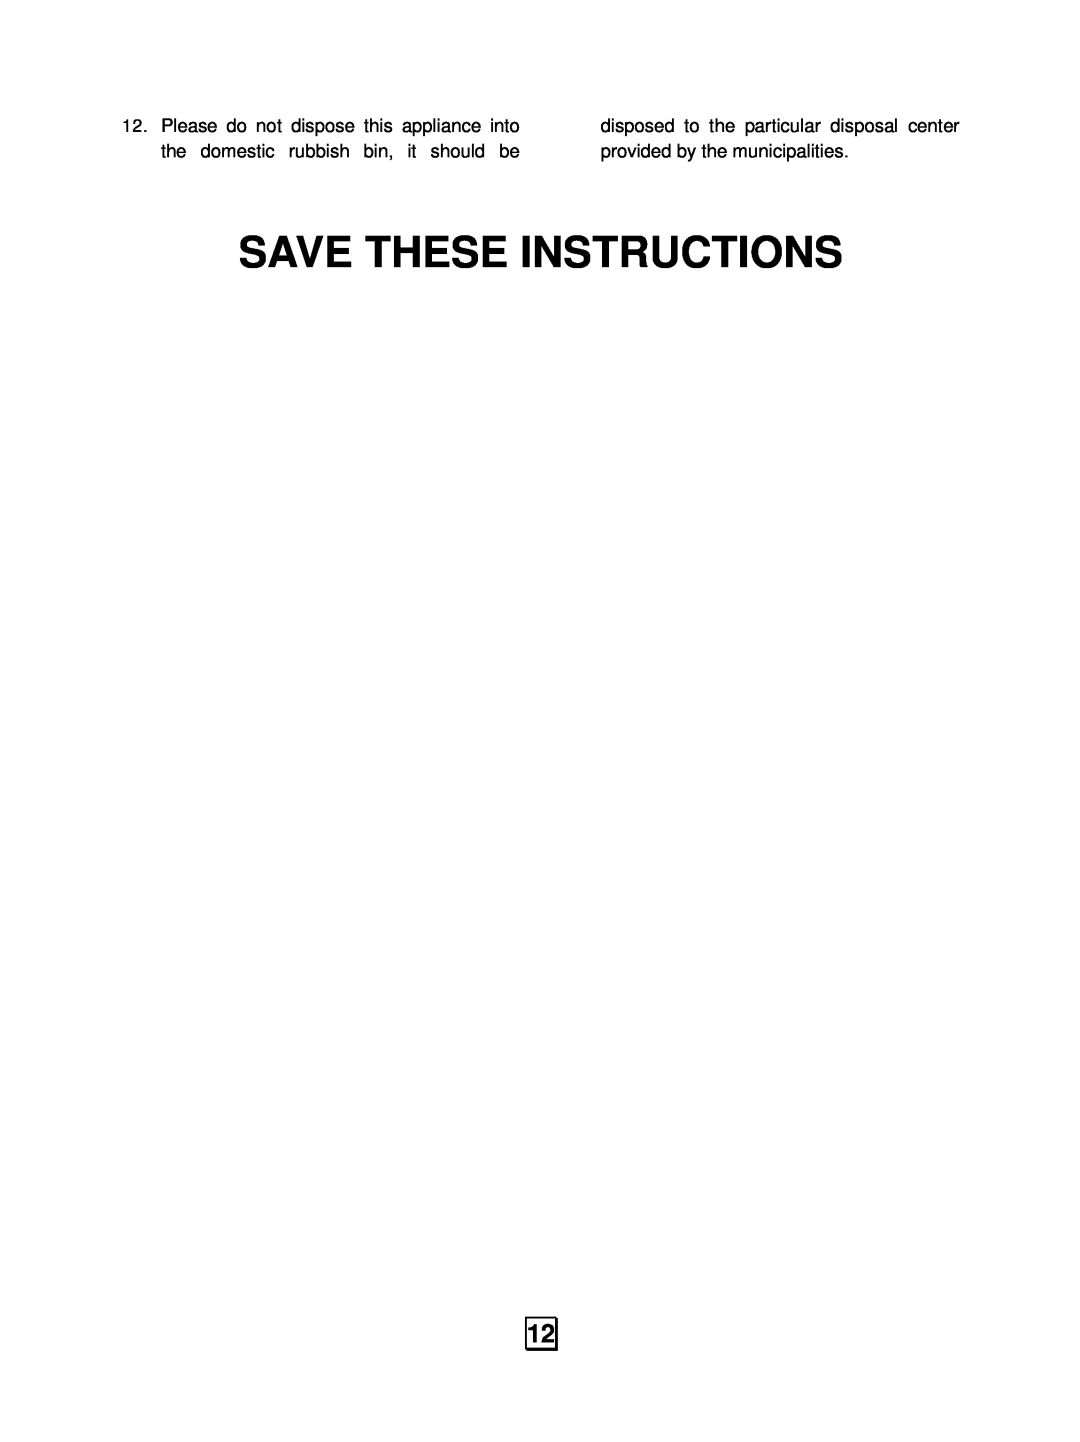 RCA RMW948 owner manual Save These Instructions 